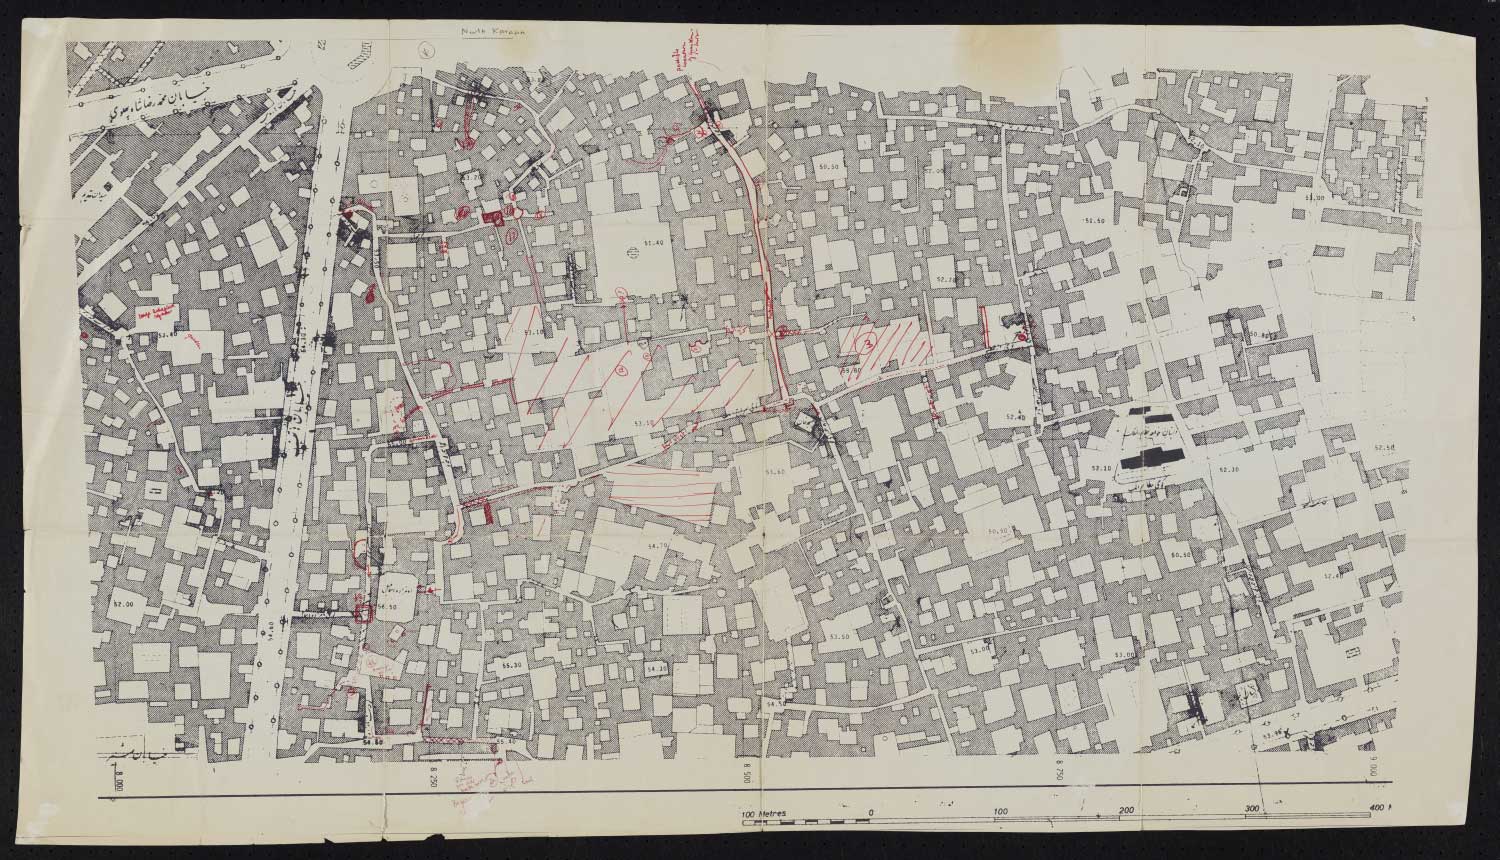 Kara'an Quarter, northern section. From a map of Isfahan at scale of 1:2500 published by the National Cartographic Centre of Iran [Sazmān-i Naqsha-Bardārī-i Kishwar] in 1963 [1342 SH]. 